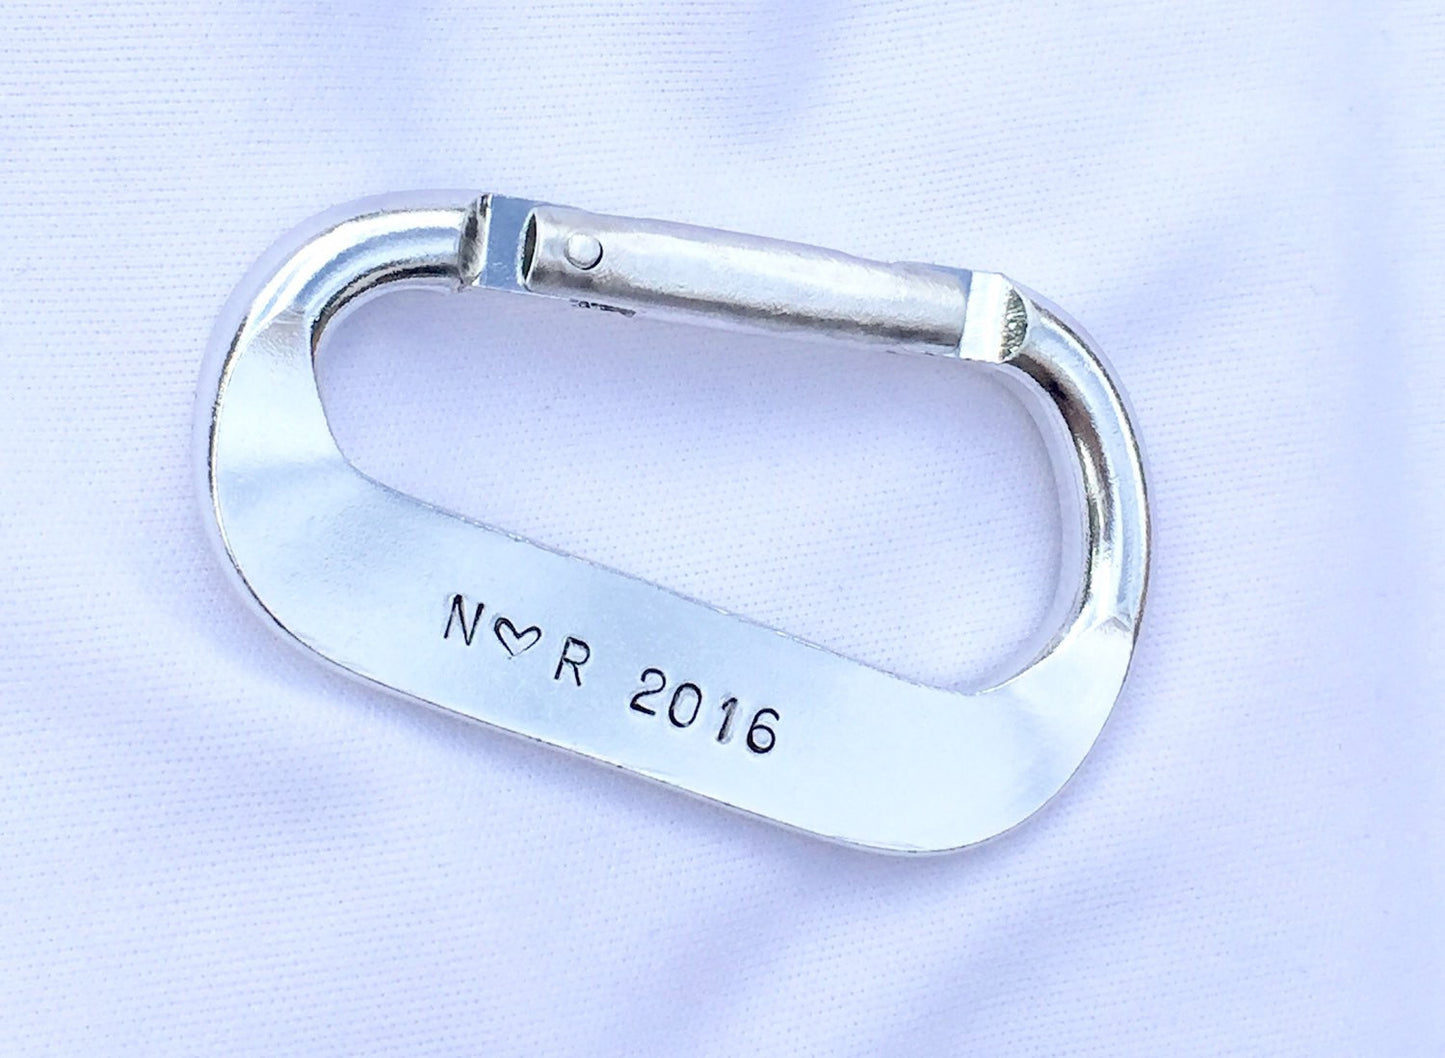 Personalized Carabiner, Featured in US Weekly, Boyfriend Gift, Fathers Day Gift, Coordinance Carabiner, natashaaloha - Natashaaloha, jewelry, bracelets, necklace, keychains, fishing lures, gifts for men, charms, personalized, 